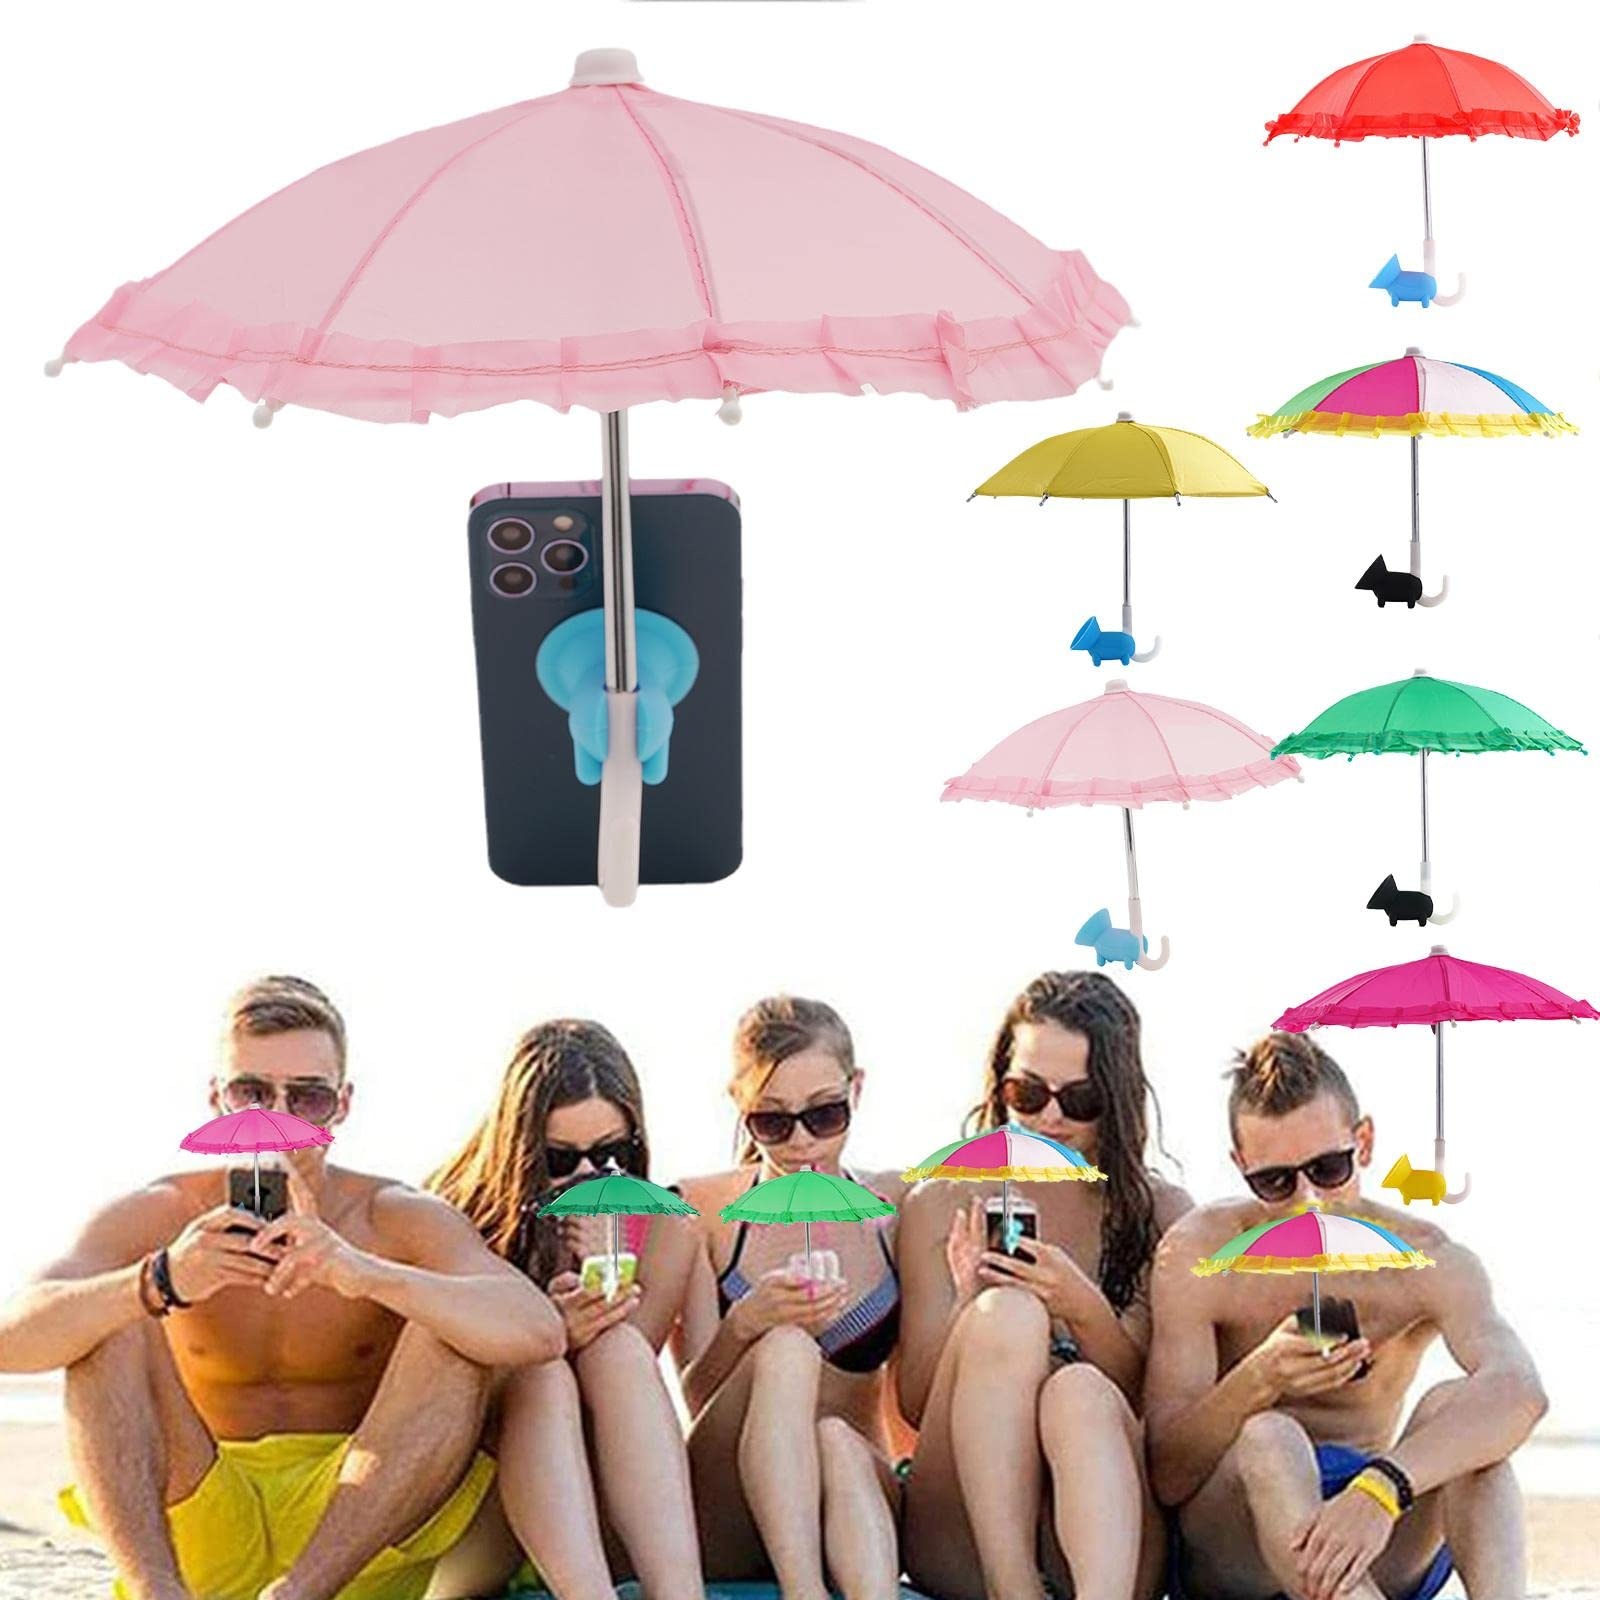 S-JIANG Phone Umbrella Suction Cup Stand - Universal Adjustable Phone Stand with Umbrella for Phone, Sun Shade Cover, Sun Shield with Suction Cup Mount Phone Holder